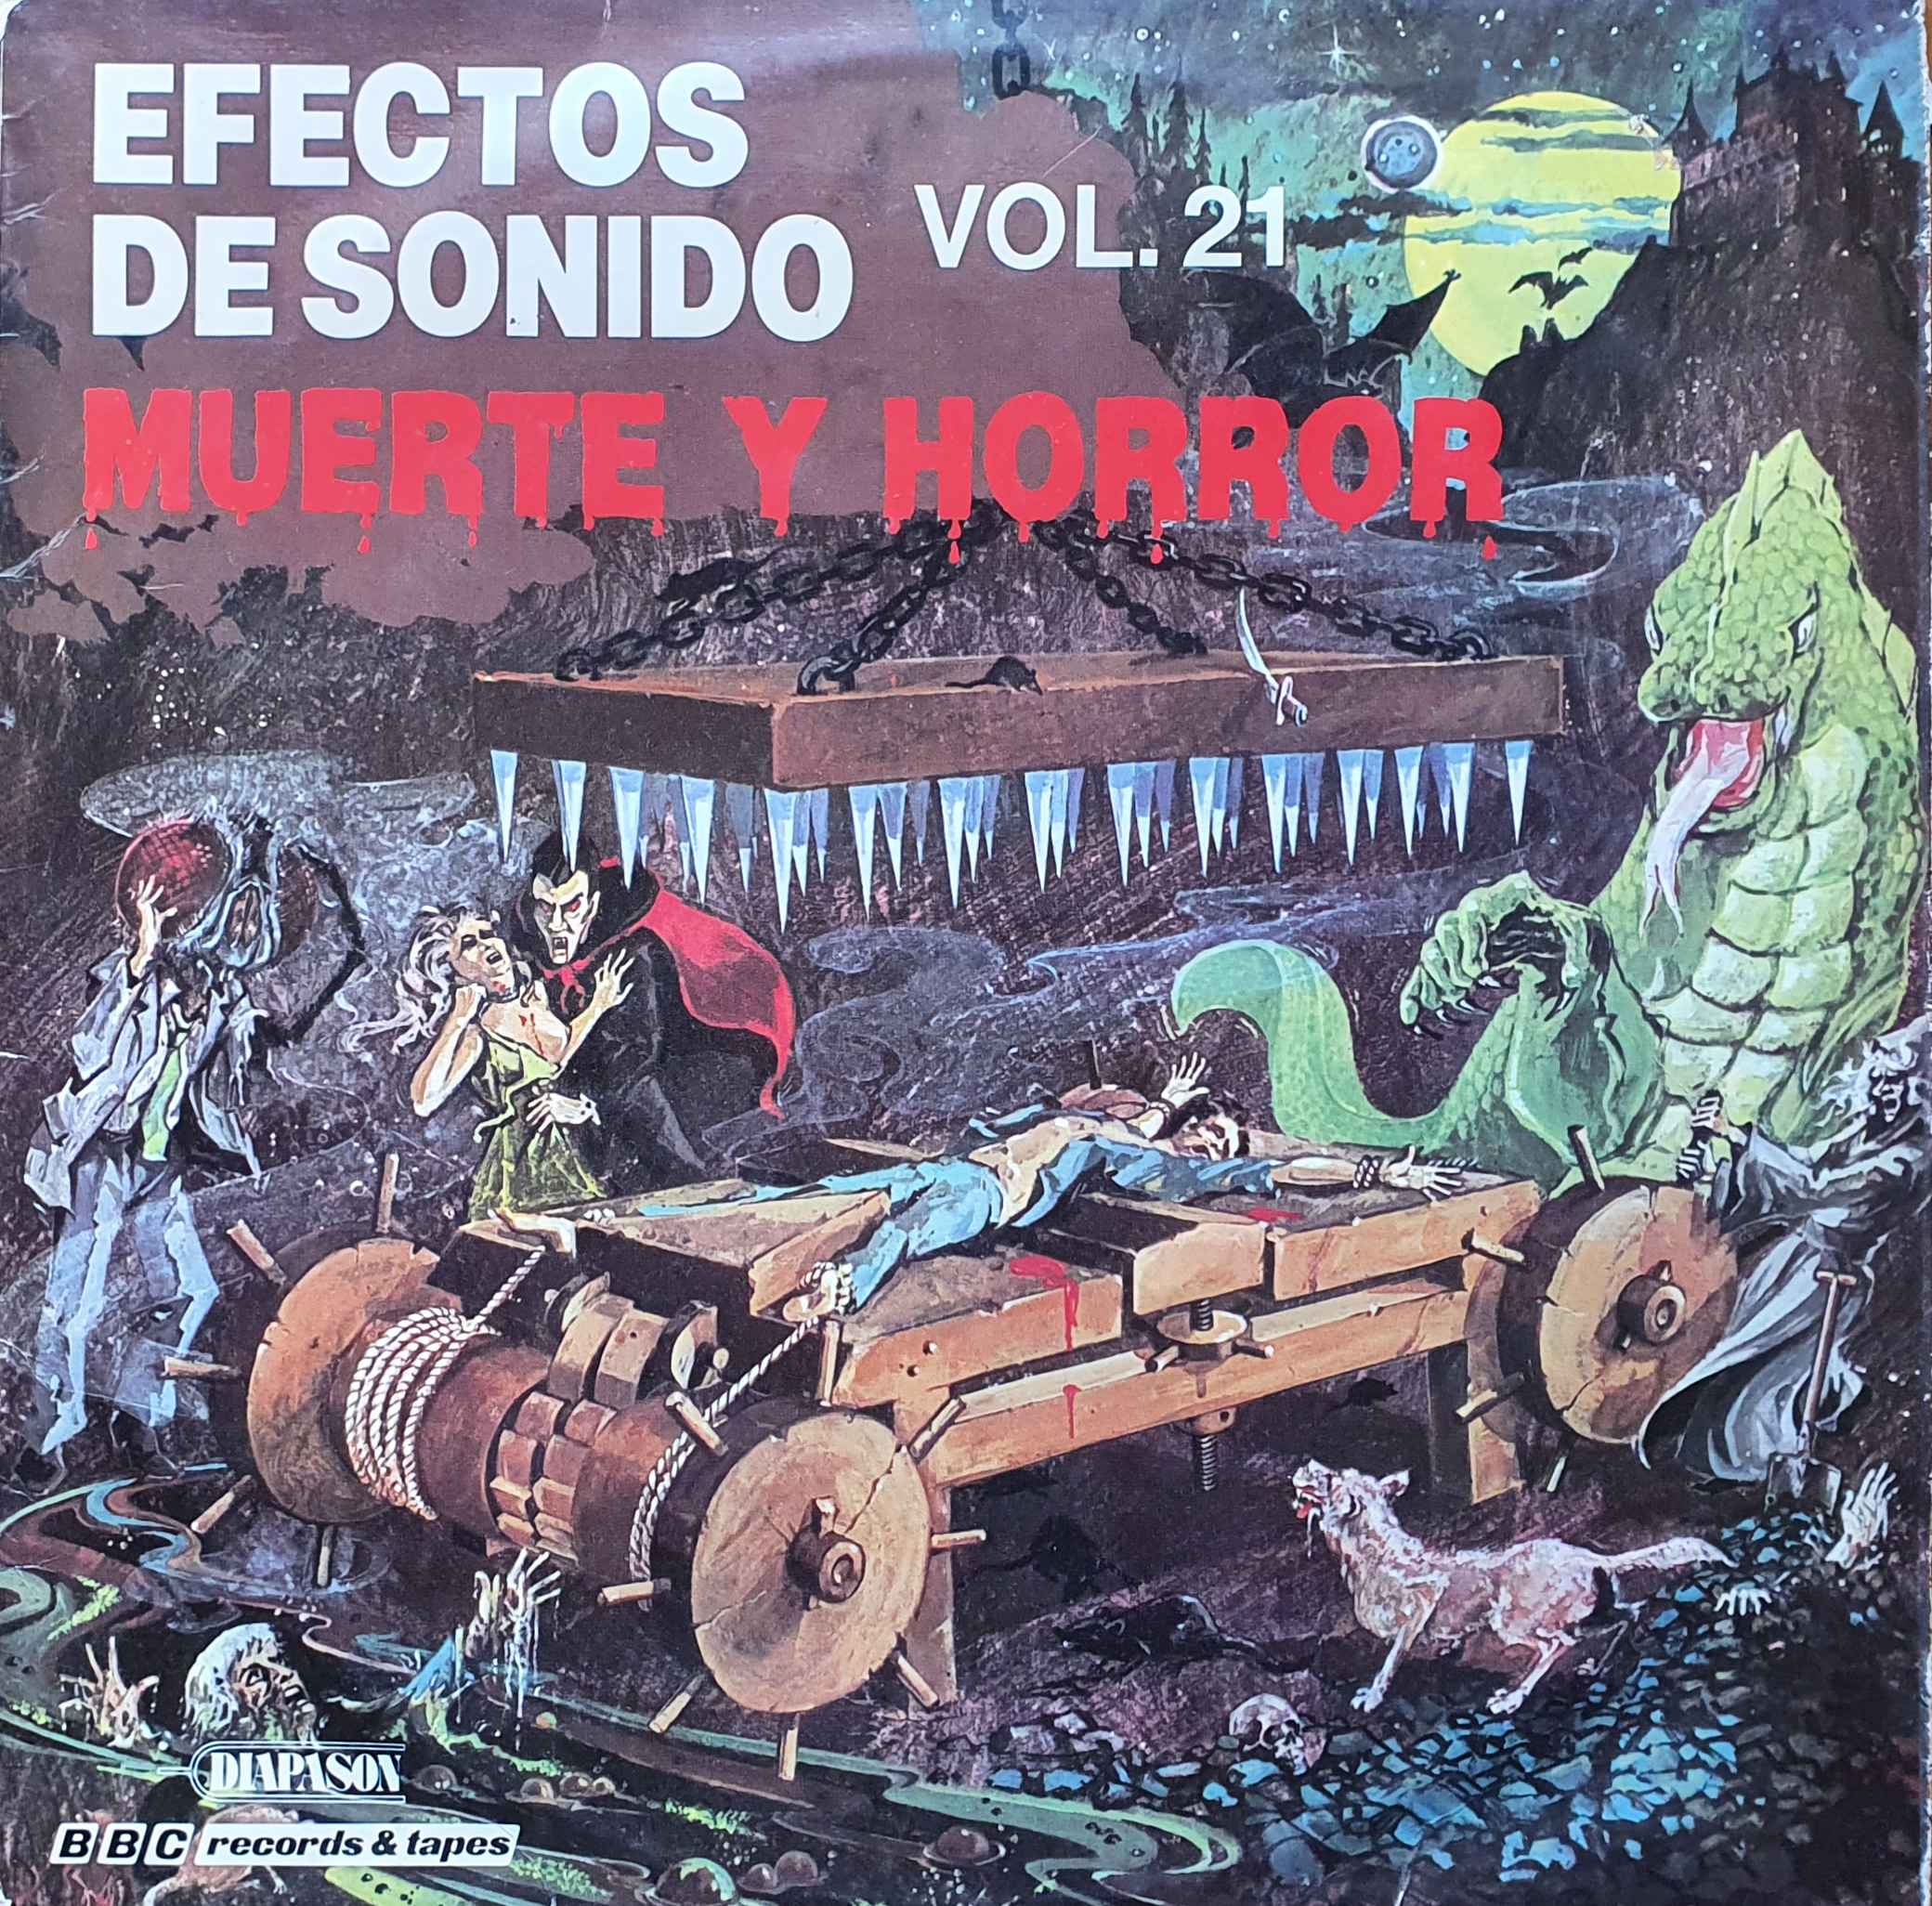 Picture of 51.0125 Efectos de sonido Vol. 21 - Muerte Y Horror (Spanish import) by artist Various from the BBC albums - Records and Tapes library